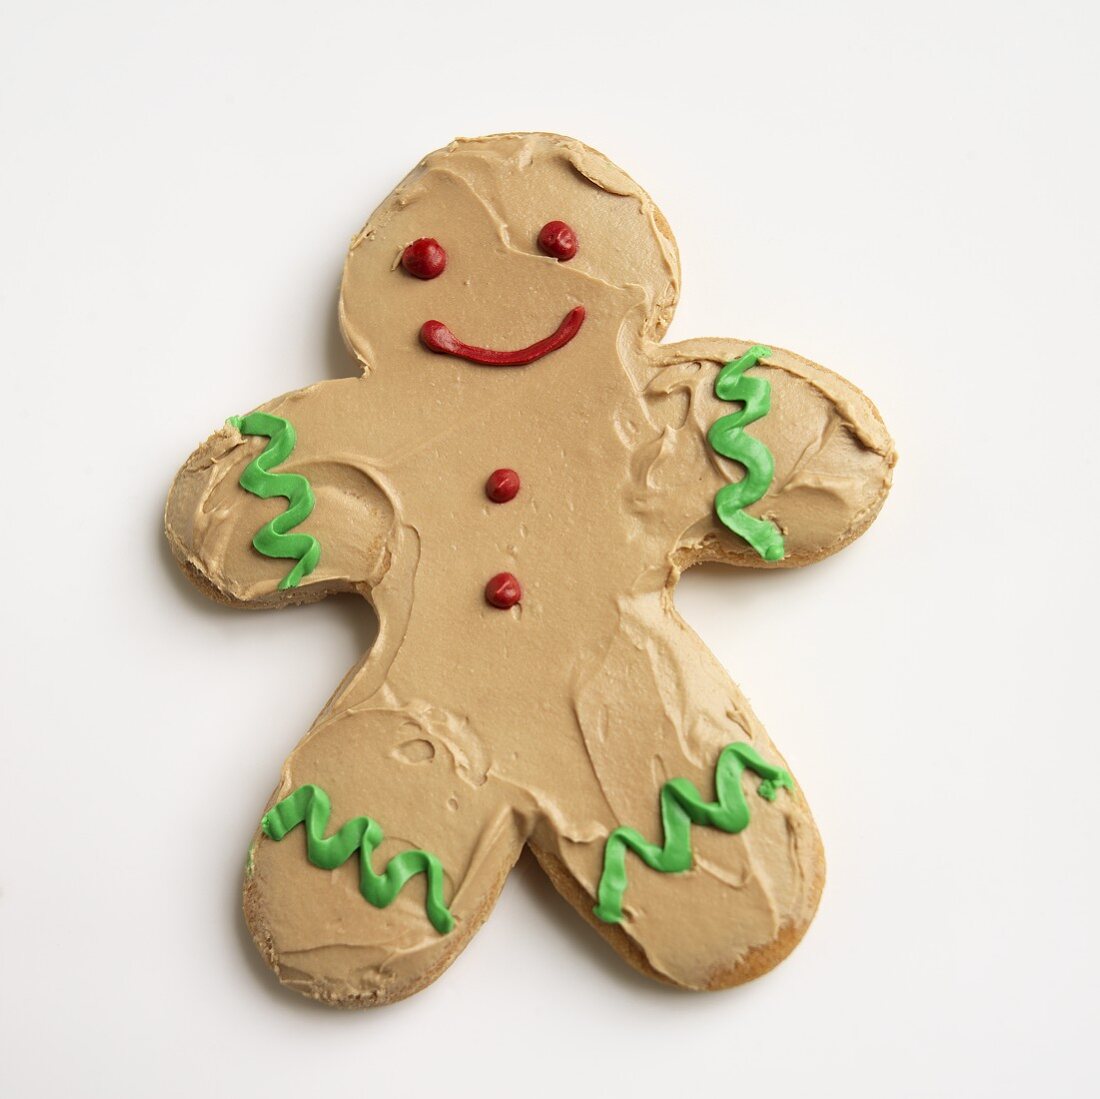 Frosted Gingerbread Man Cookie on White